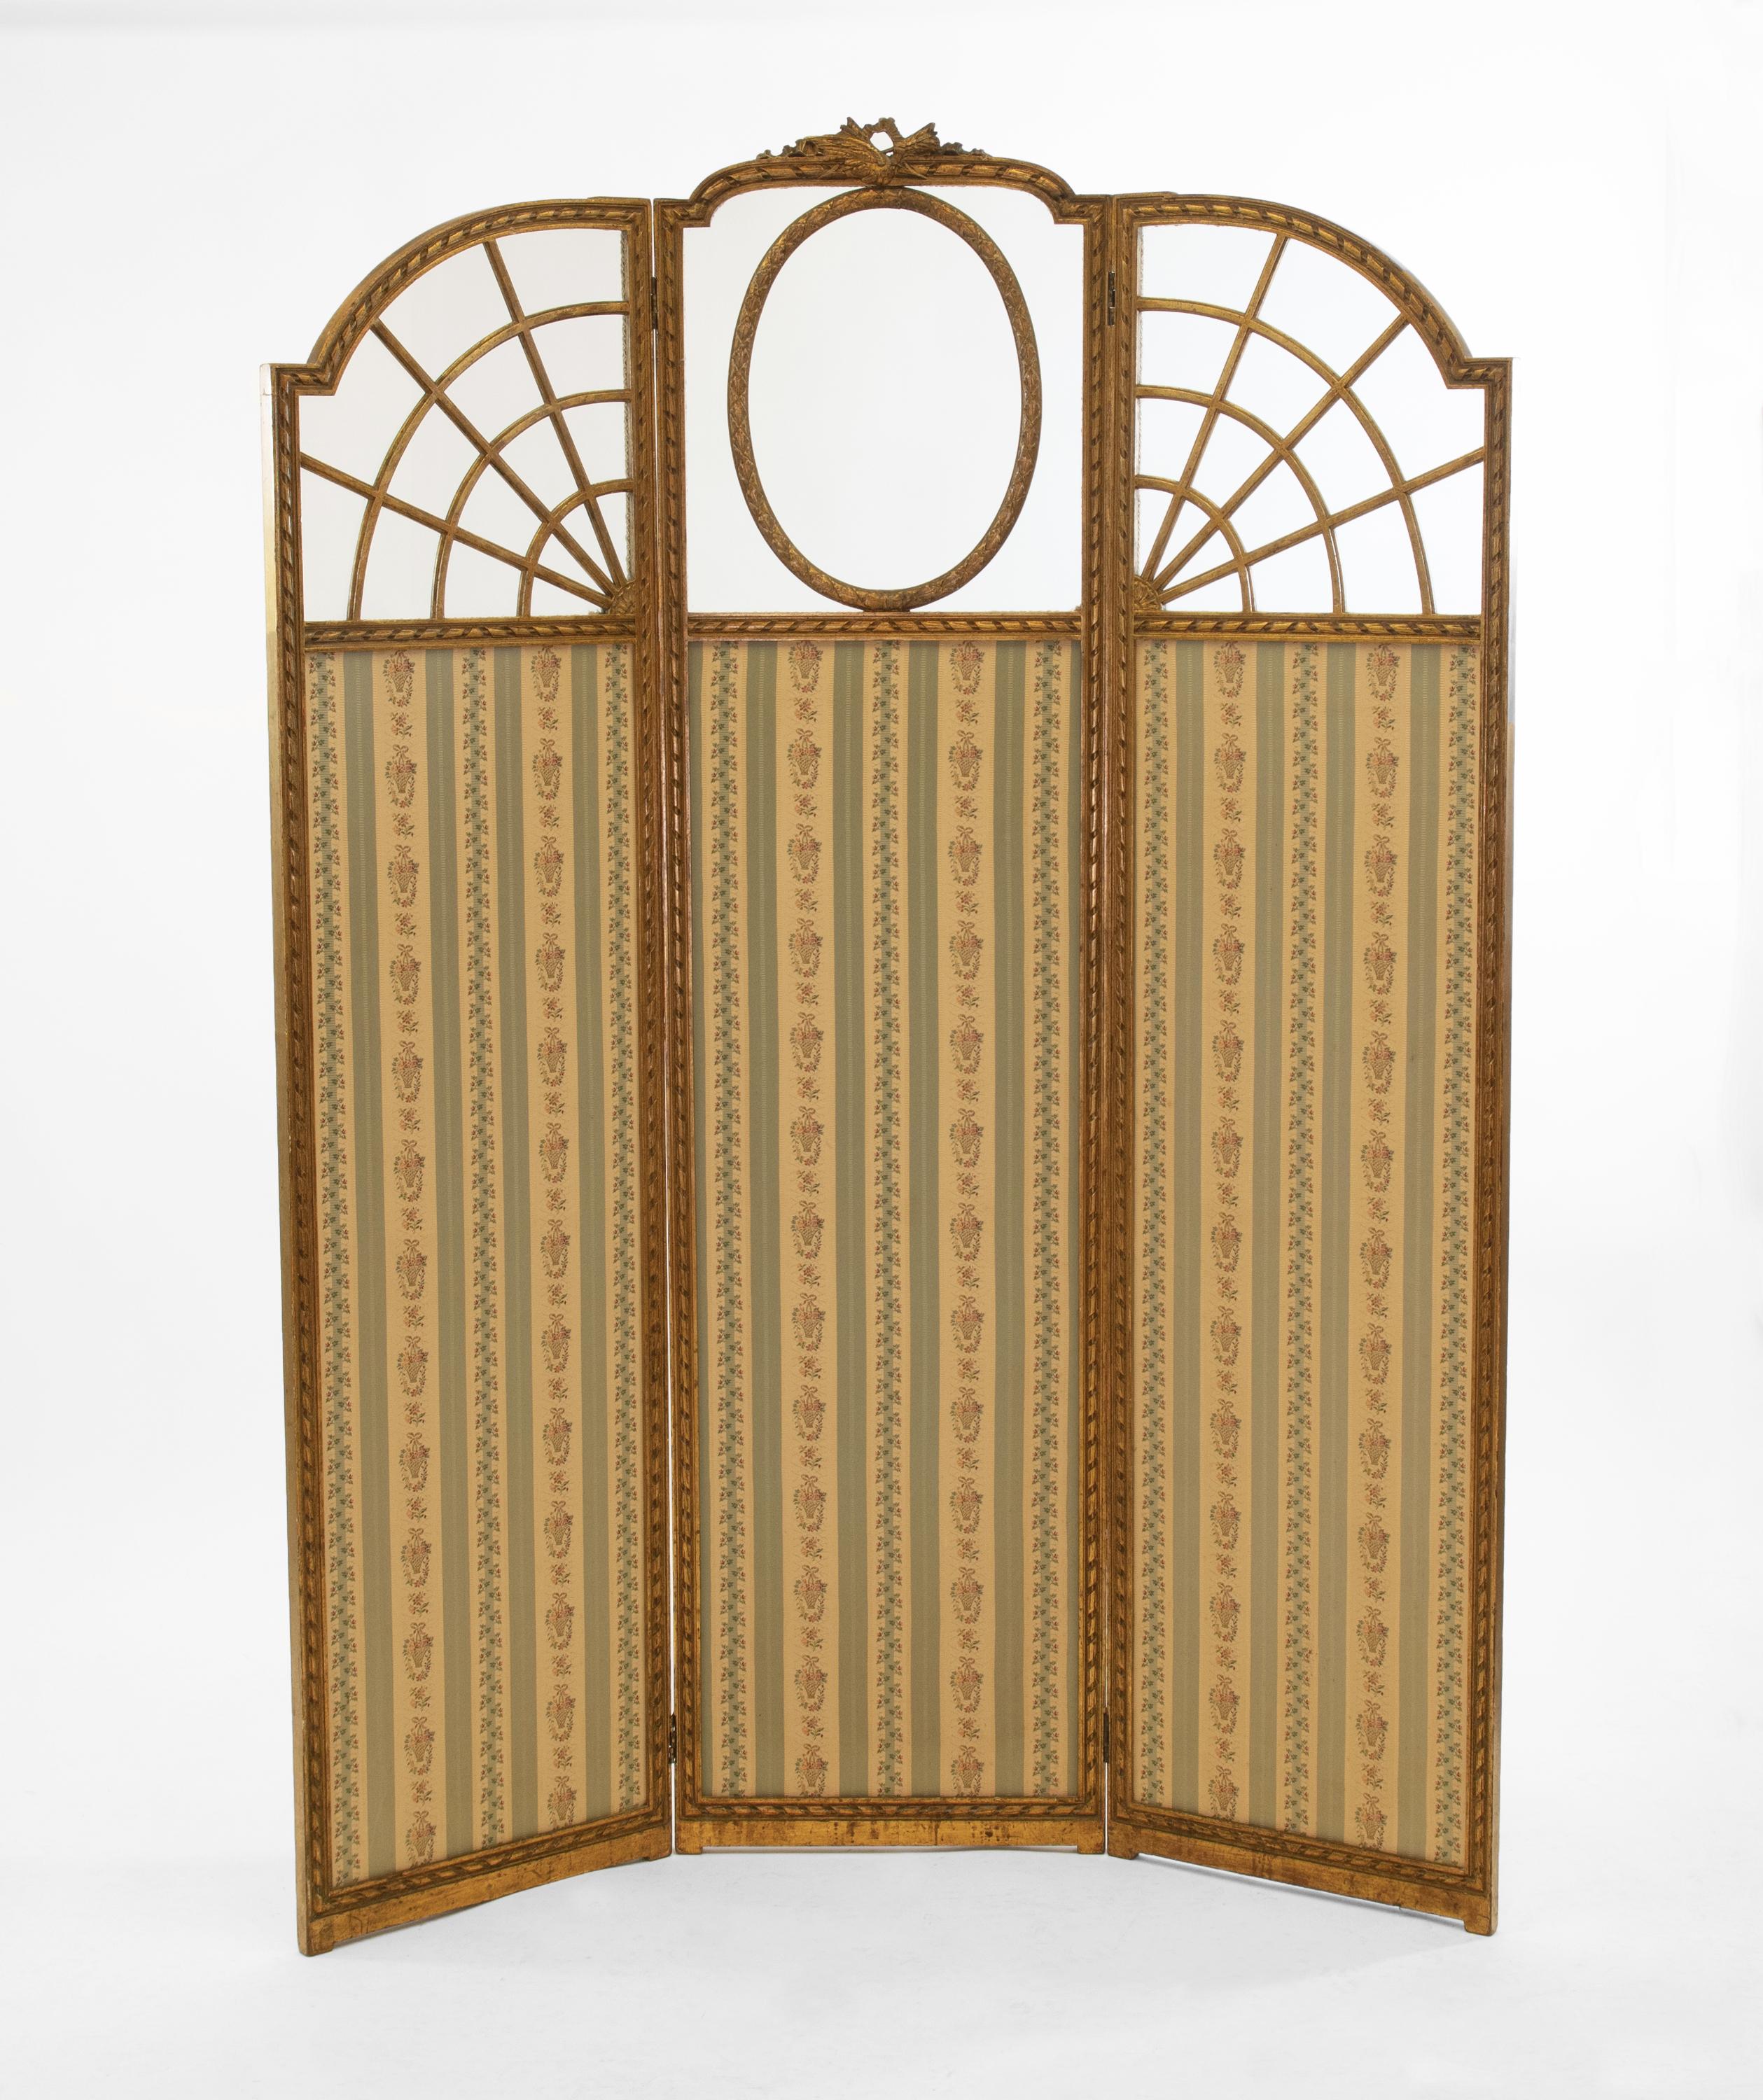 Fabric Antique English Edwardian Gilt Wood Folding Screen Room Divider For Sale